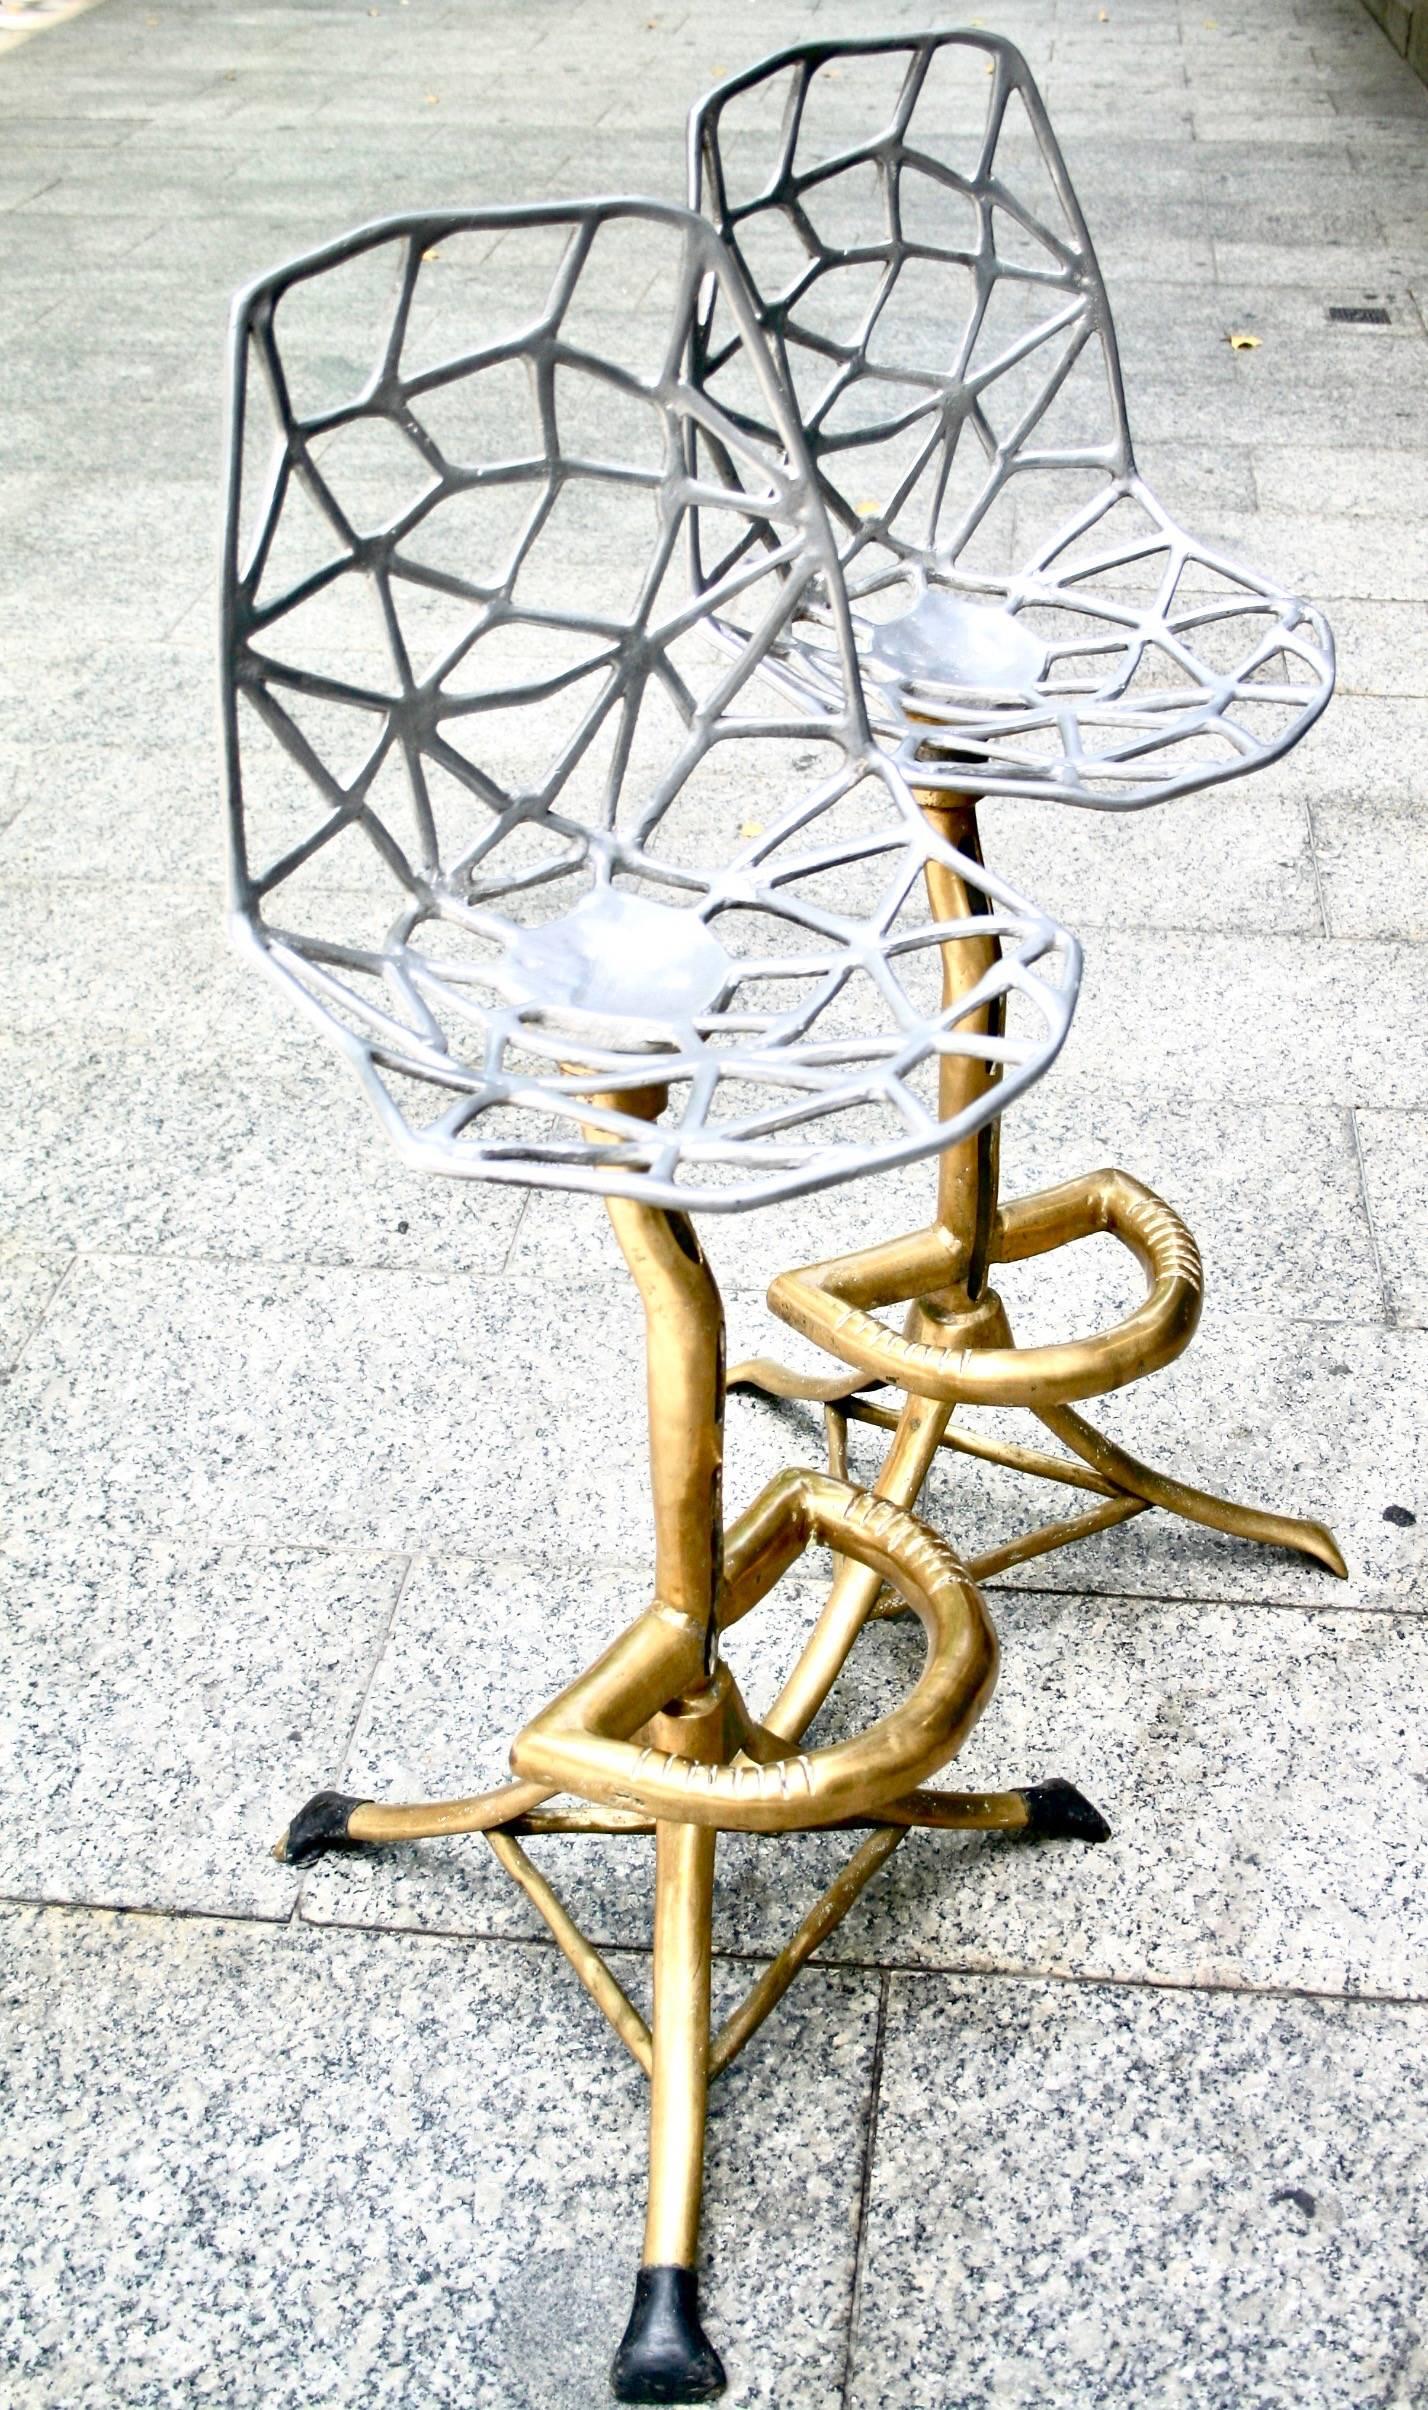 Pair of 1970s bronze and aluminium stools manufactured by David Marshall.

More than 50 years ago, attracted by the climate, light and magnificent scenery David Marshall left his native Scotland, settled in southern Spain and commenced his